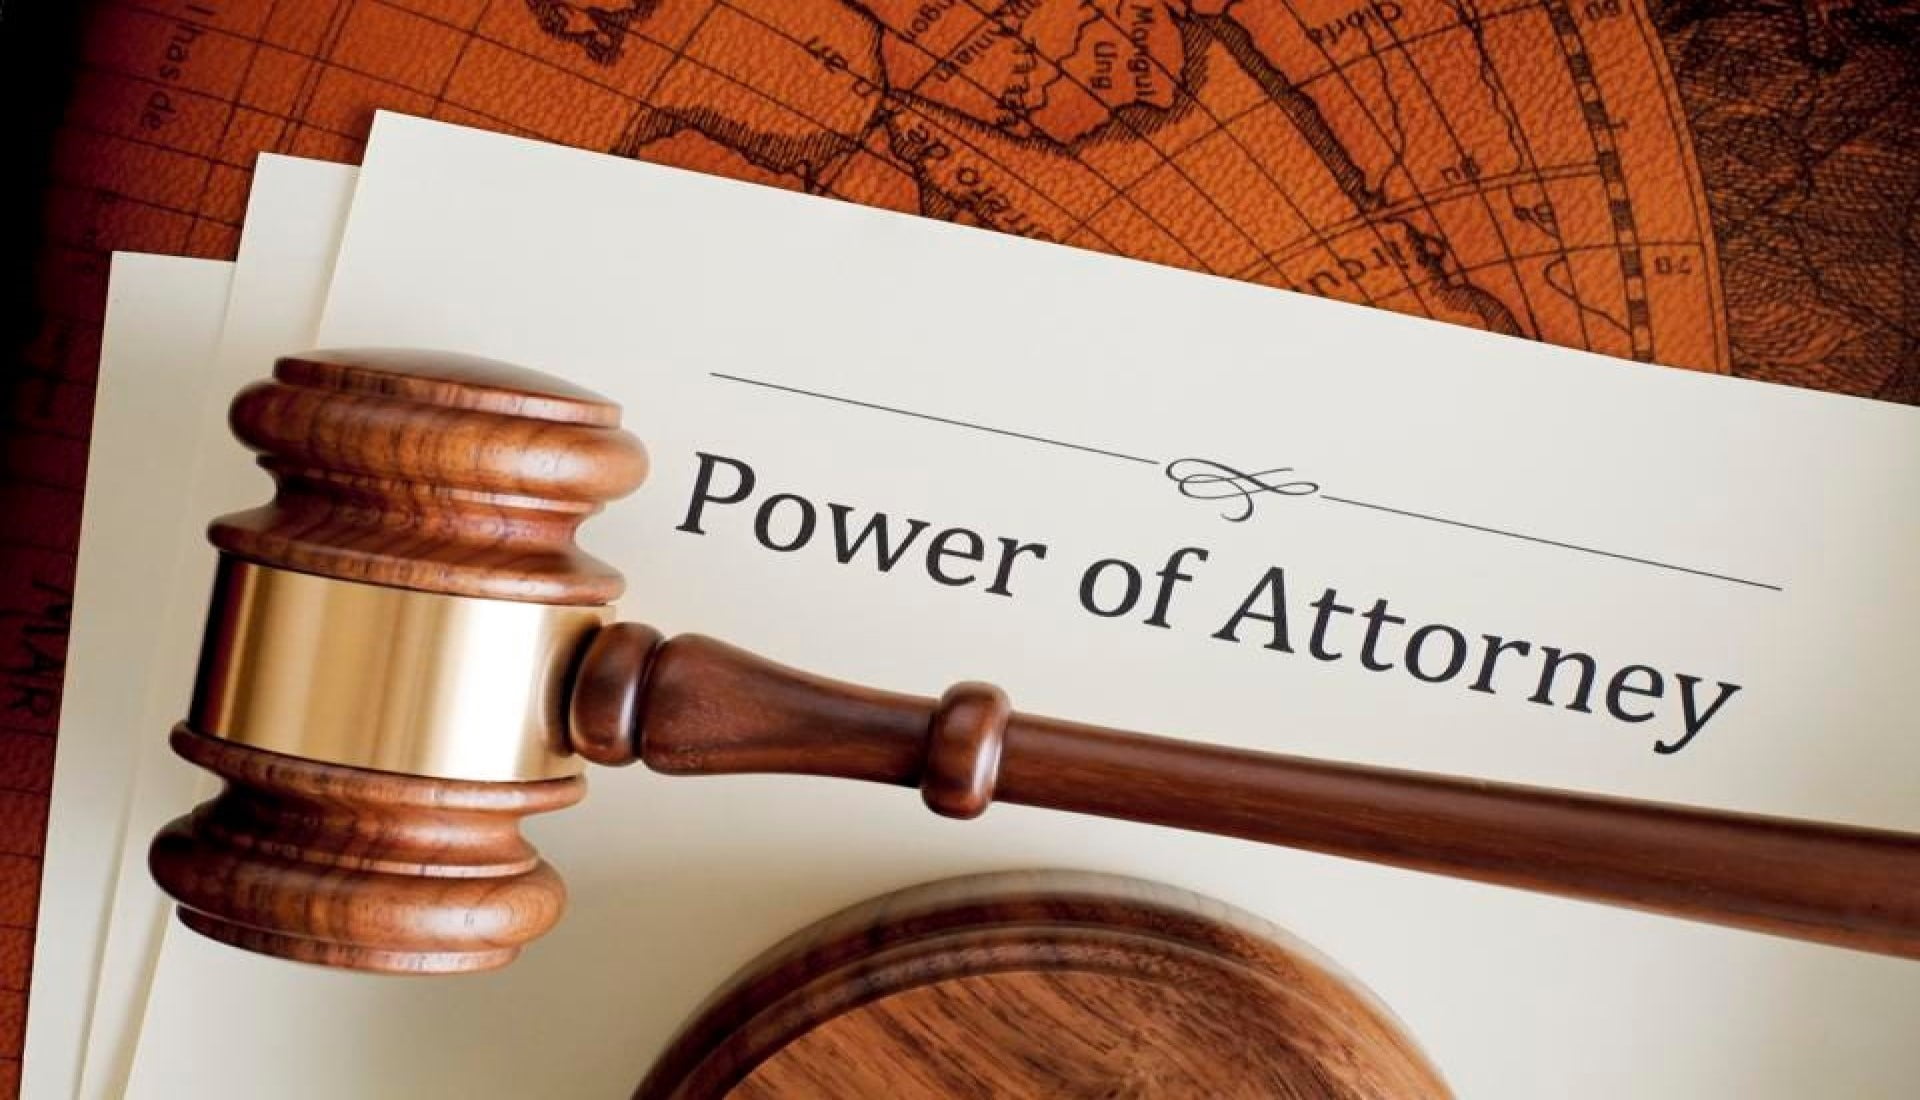 Which power of attorney?